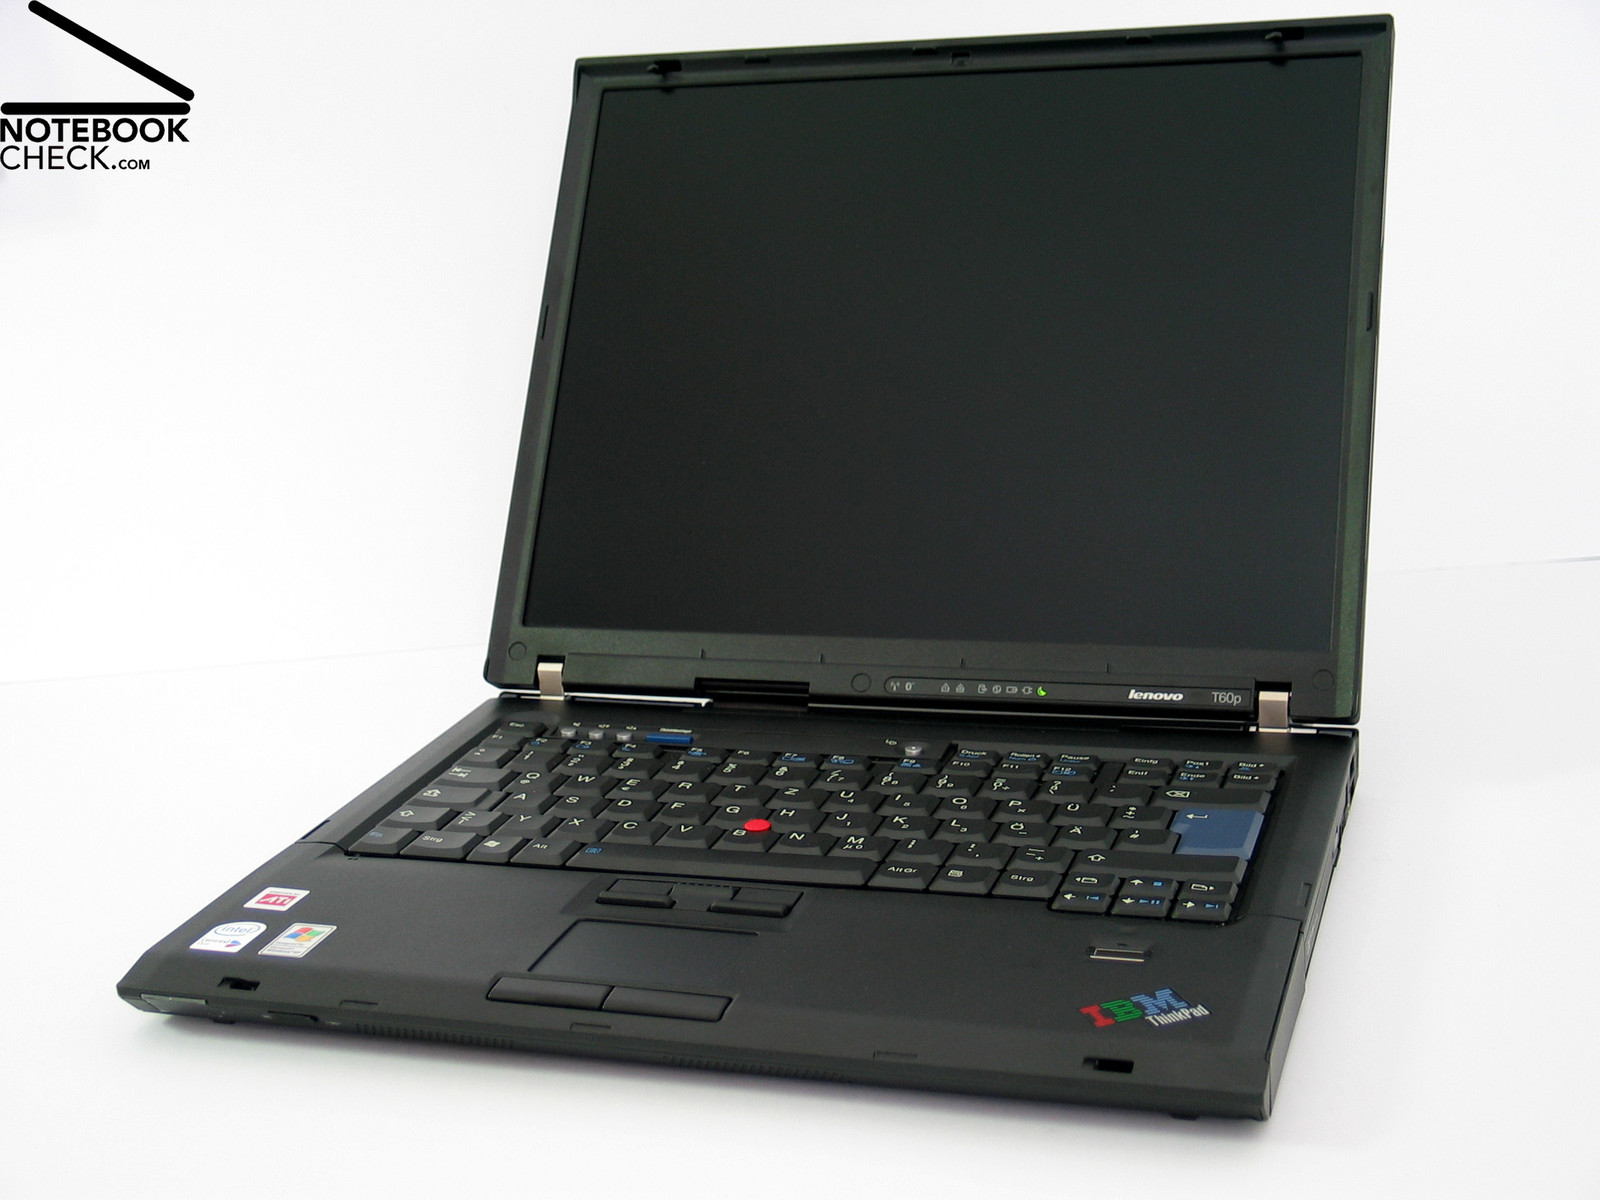 Ibm lenovo thinkpad t60 laptop reviews the domovoy is a house spirit who